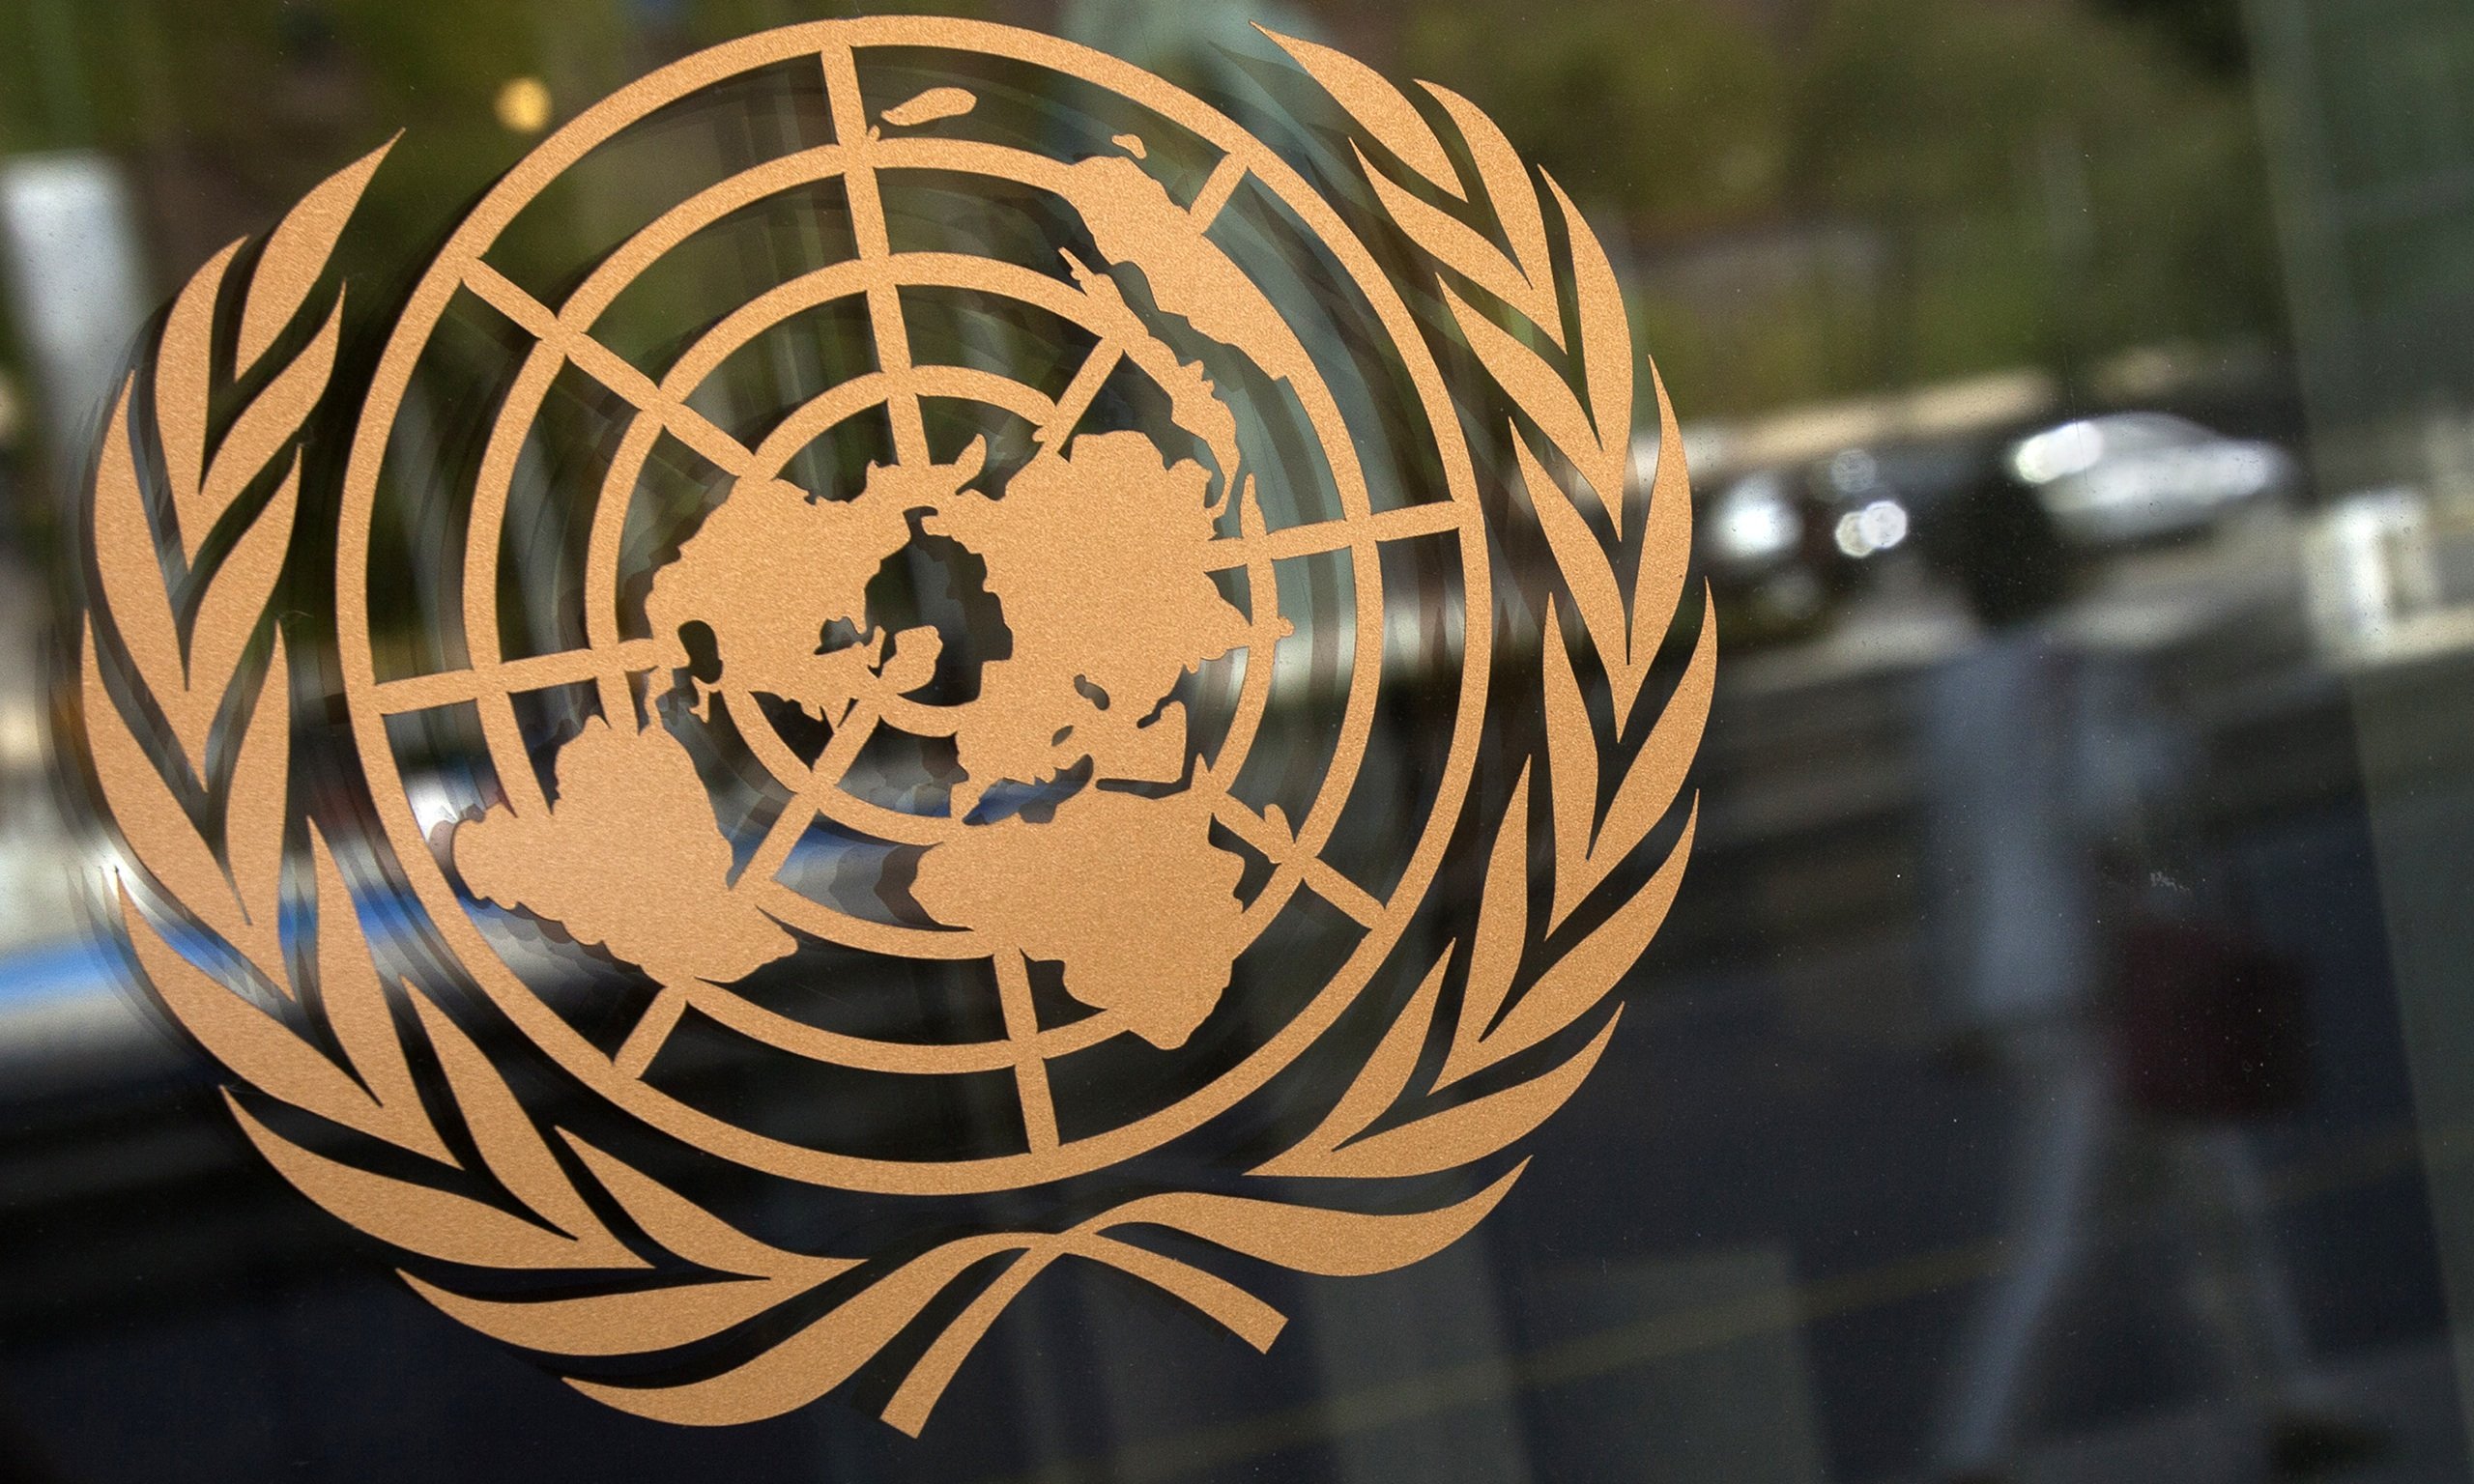 Report: UN officials force children into sexual abuse to get FOOD